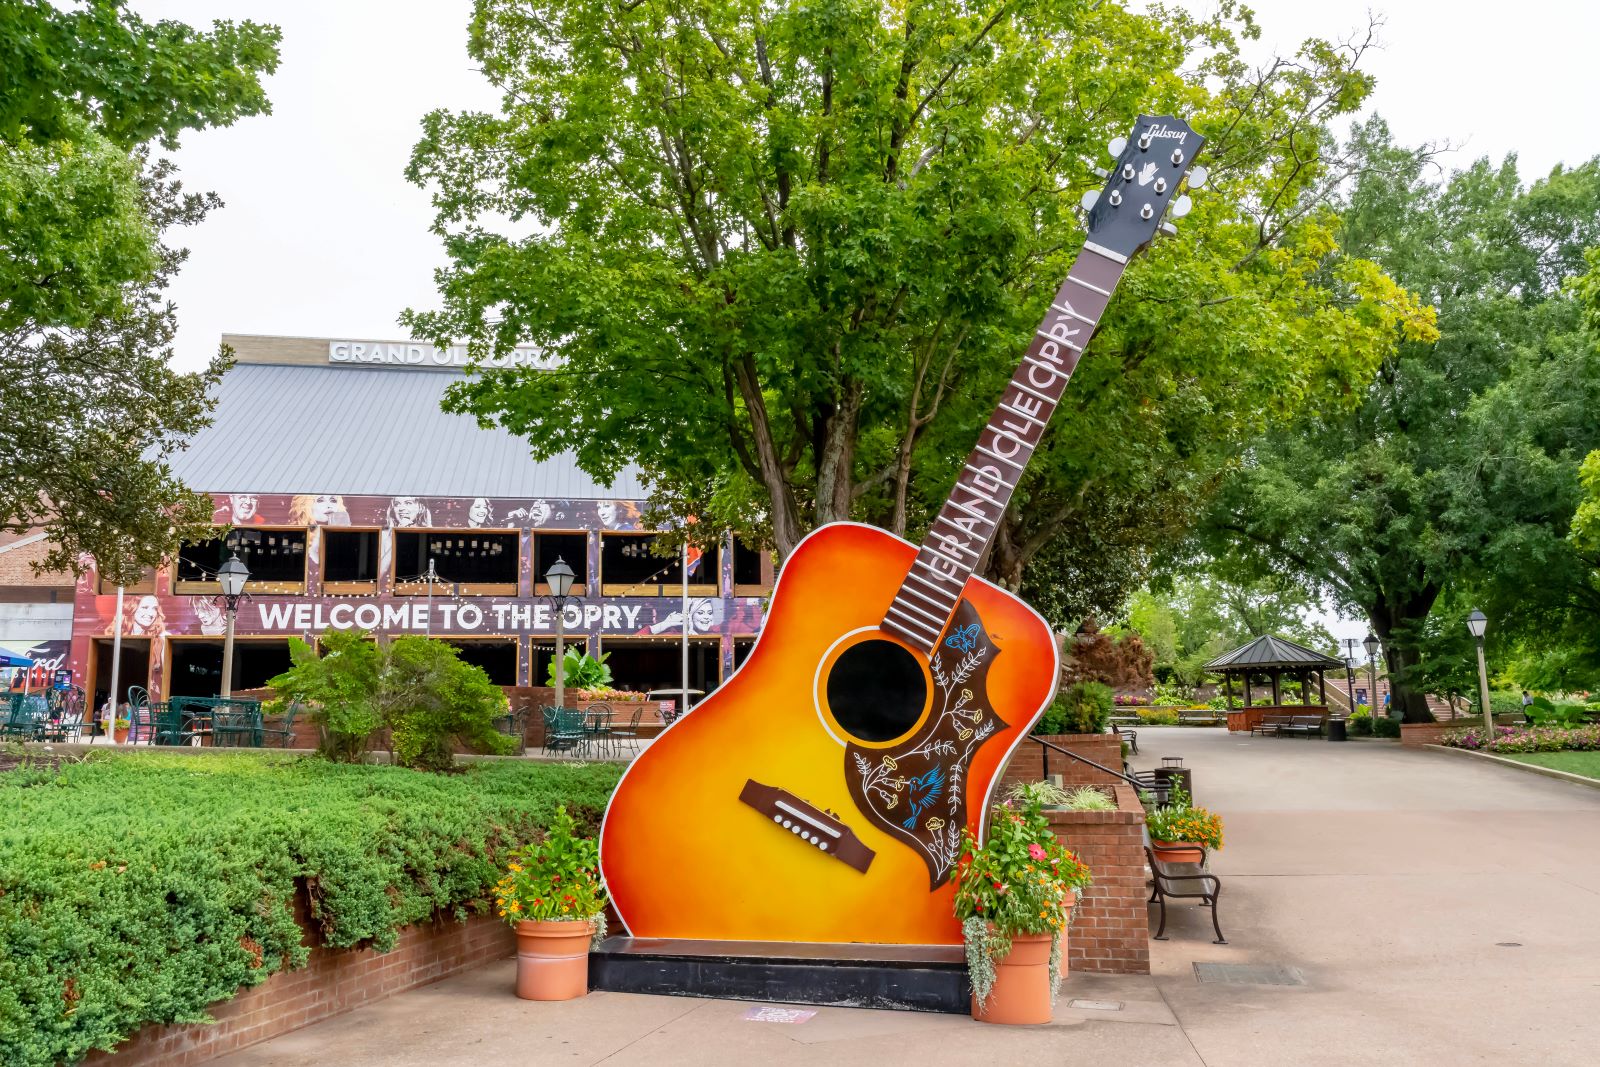 Image credit: Shutterstock / Grindstone Media Group <p>While Nashville is famed for its music scene, its parks and green spaces offer a peaceful escape from the city’s hustle. Tip: The city’s bike share program is an affordable way to explore the area.</p>